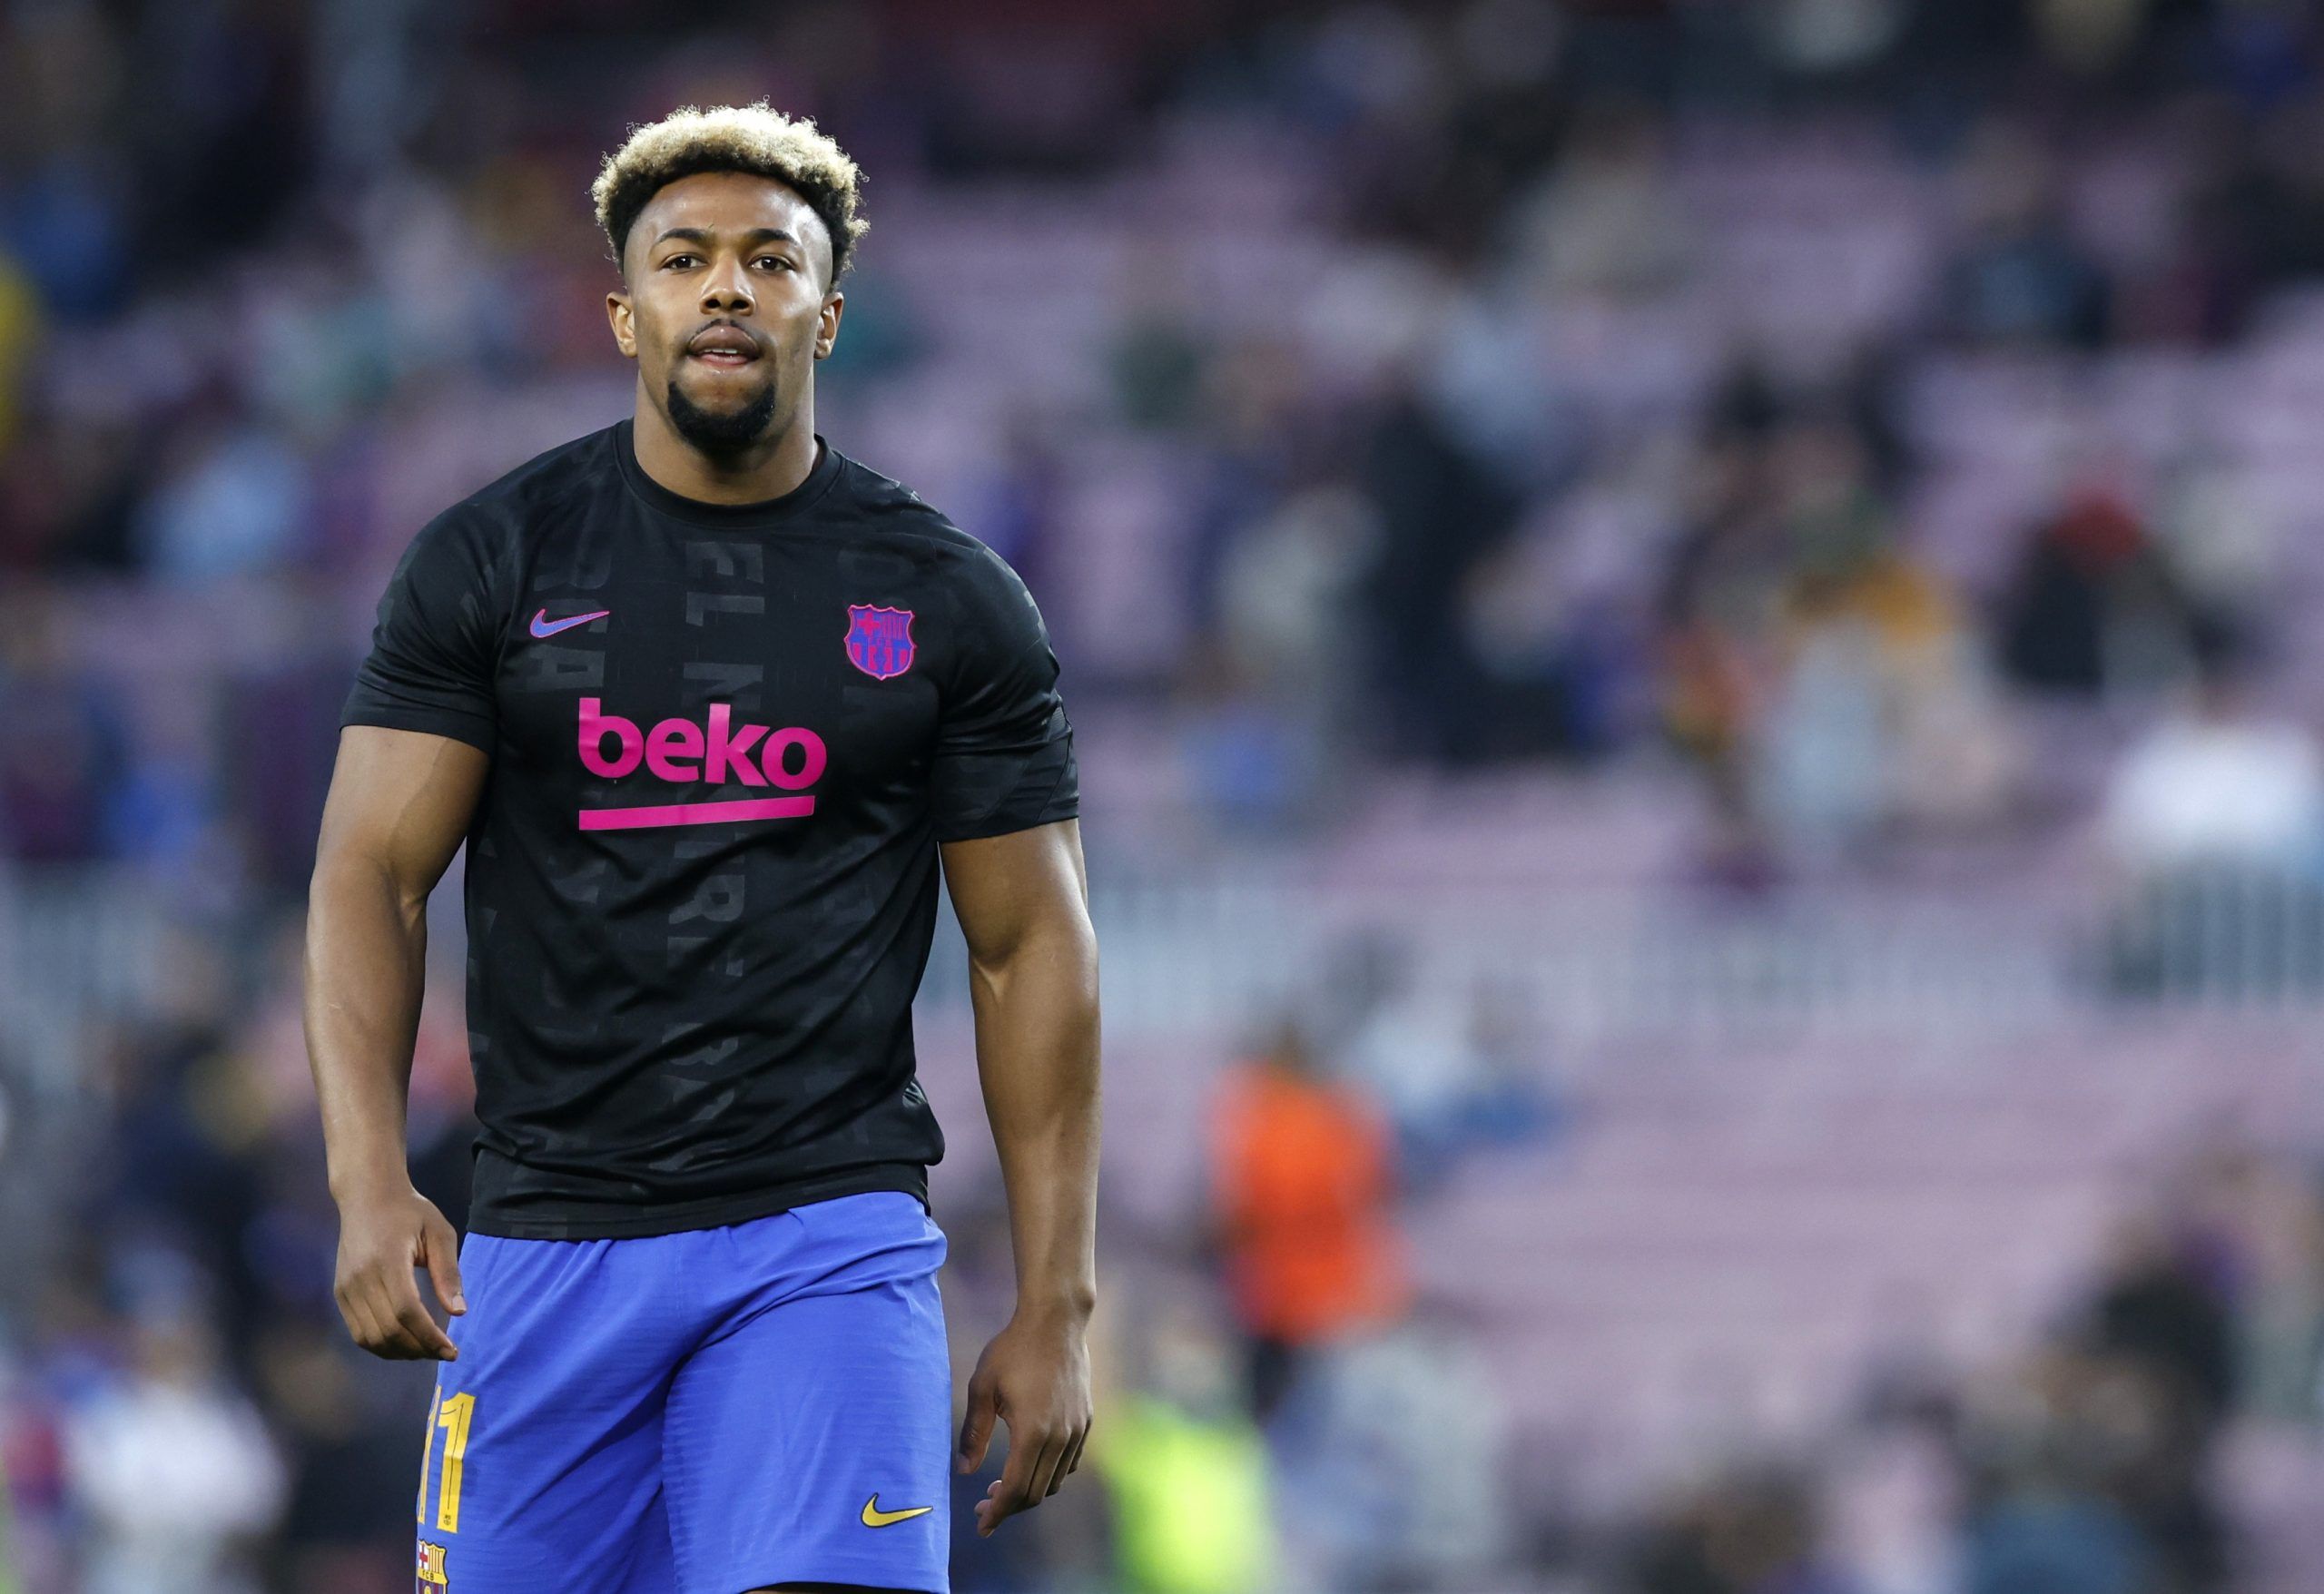 Soccer Football - Europa League - Play Off First Leg - FC Barcelona v Napoli - Camp Nou, Barcelona, Spain - February 17, 2022 FC Barcelona's Adama Traore during the warm up before the match REUTERS/Albert Gea